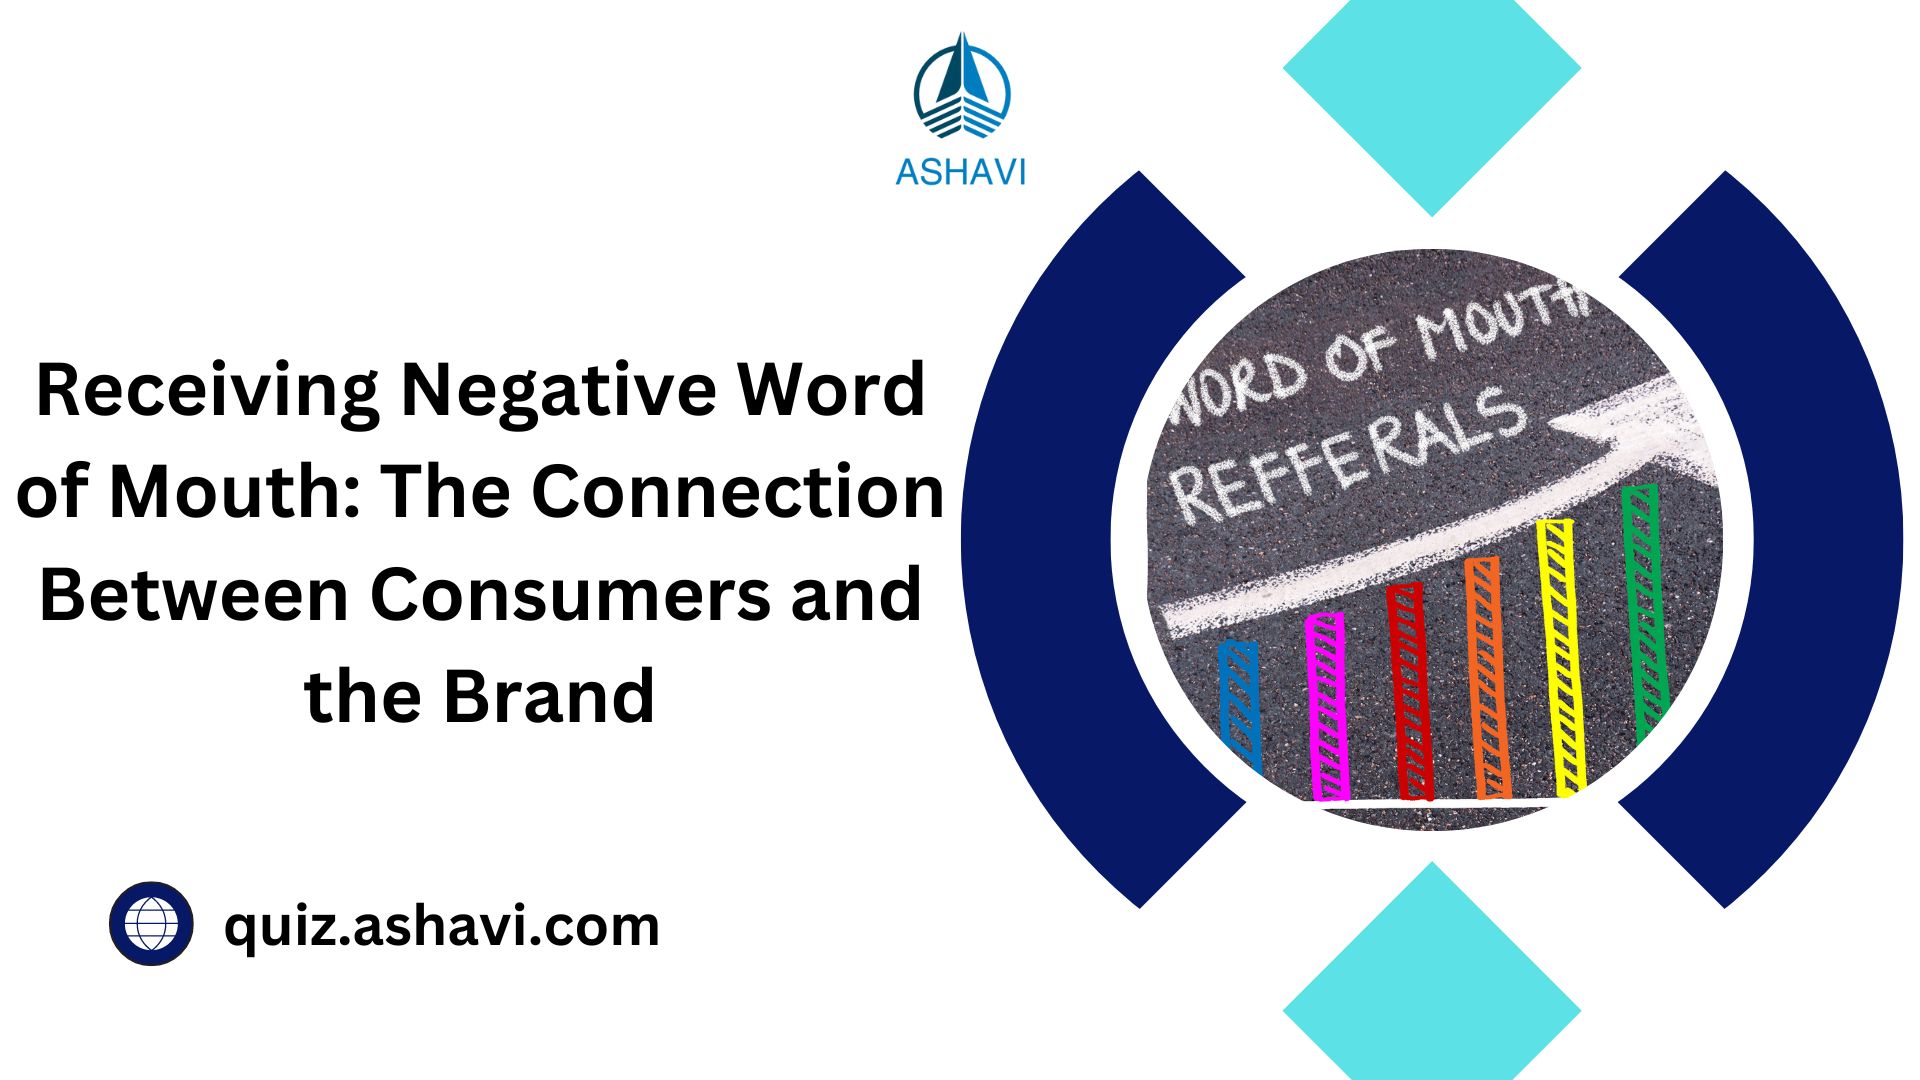 Receiving Negative Word of Mouth: The Connection Between Consumers and the Brand